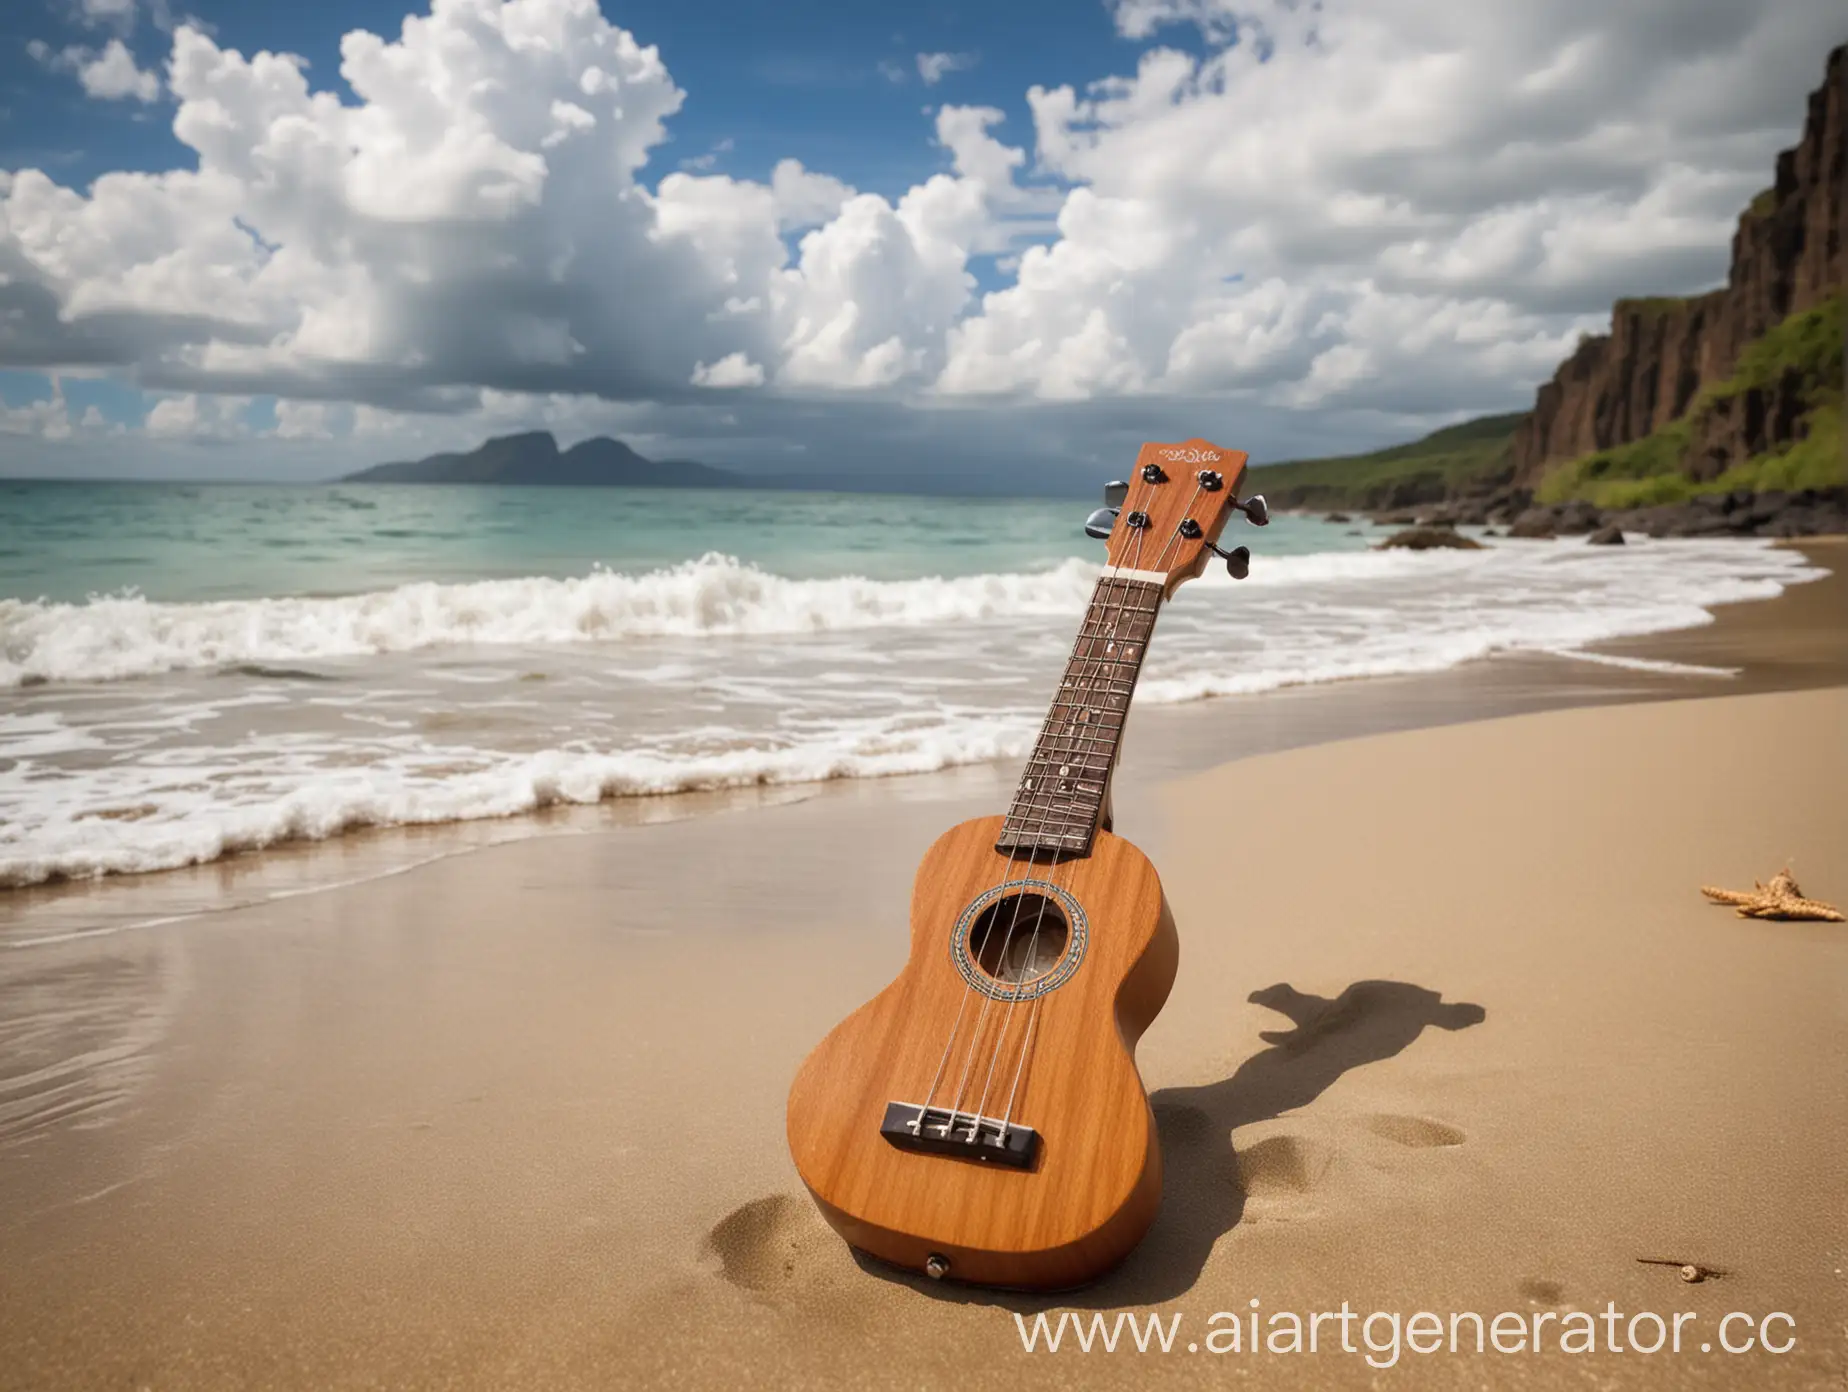 Ukulele-on-Sandy-Beach-with-Sea-and-Clouds-in-Background